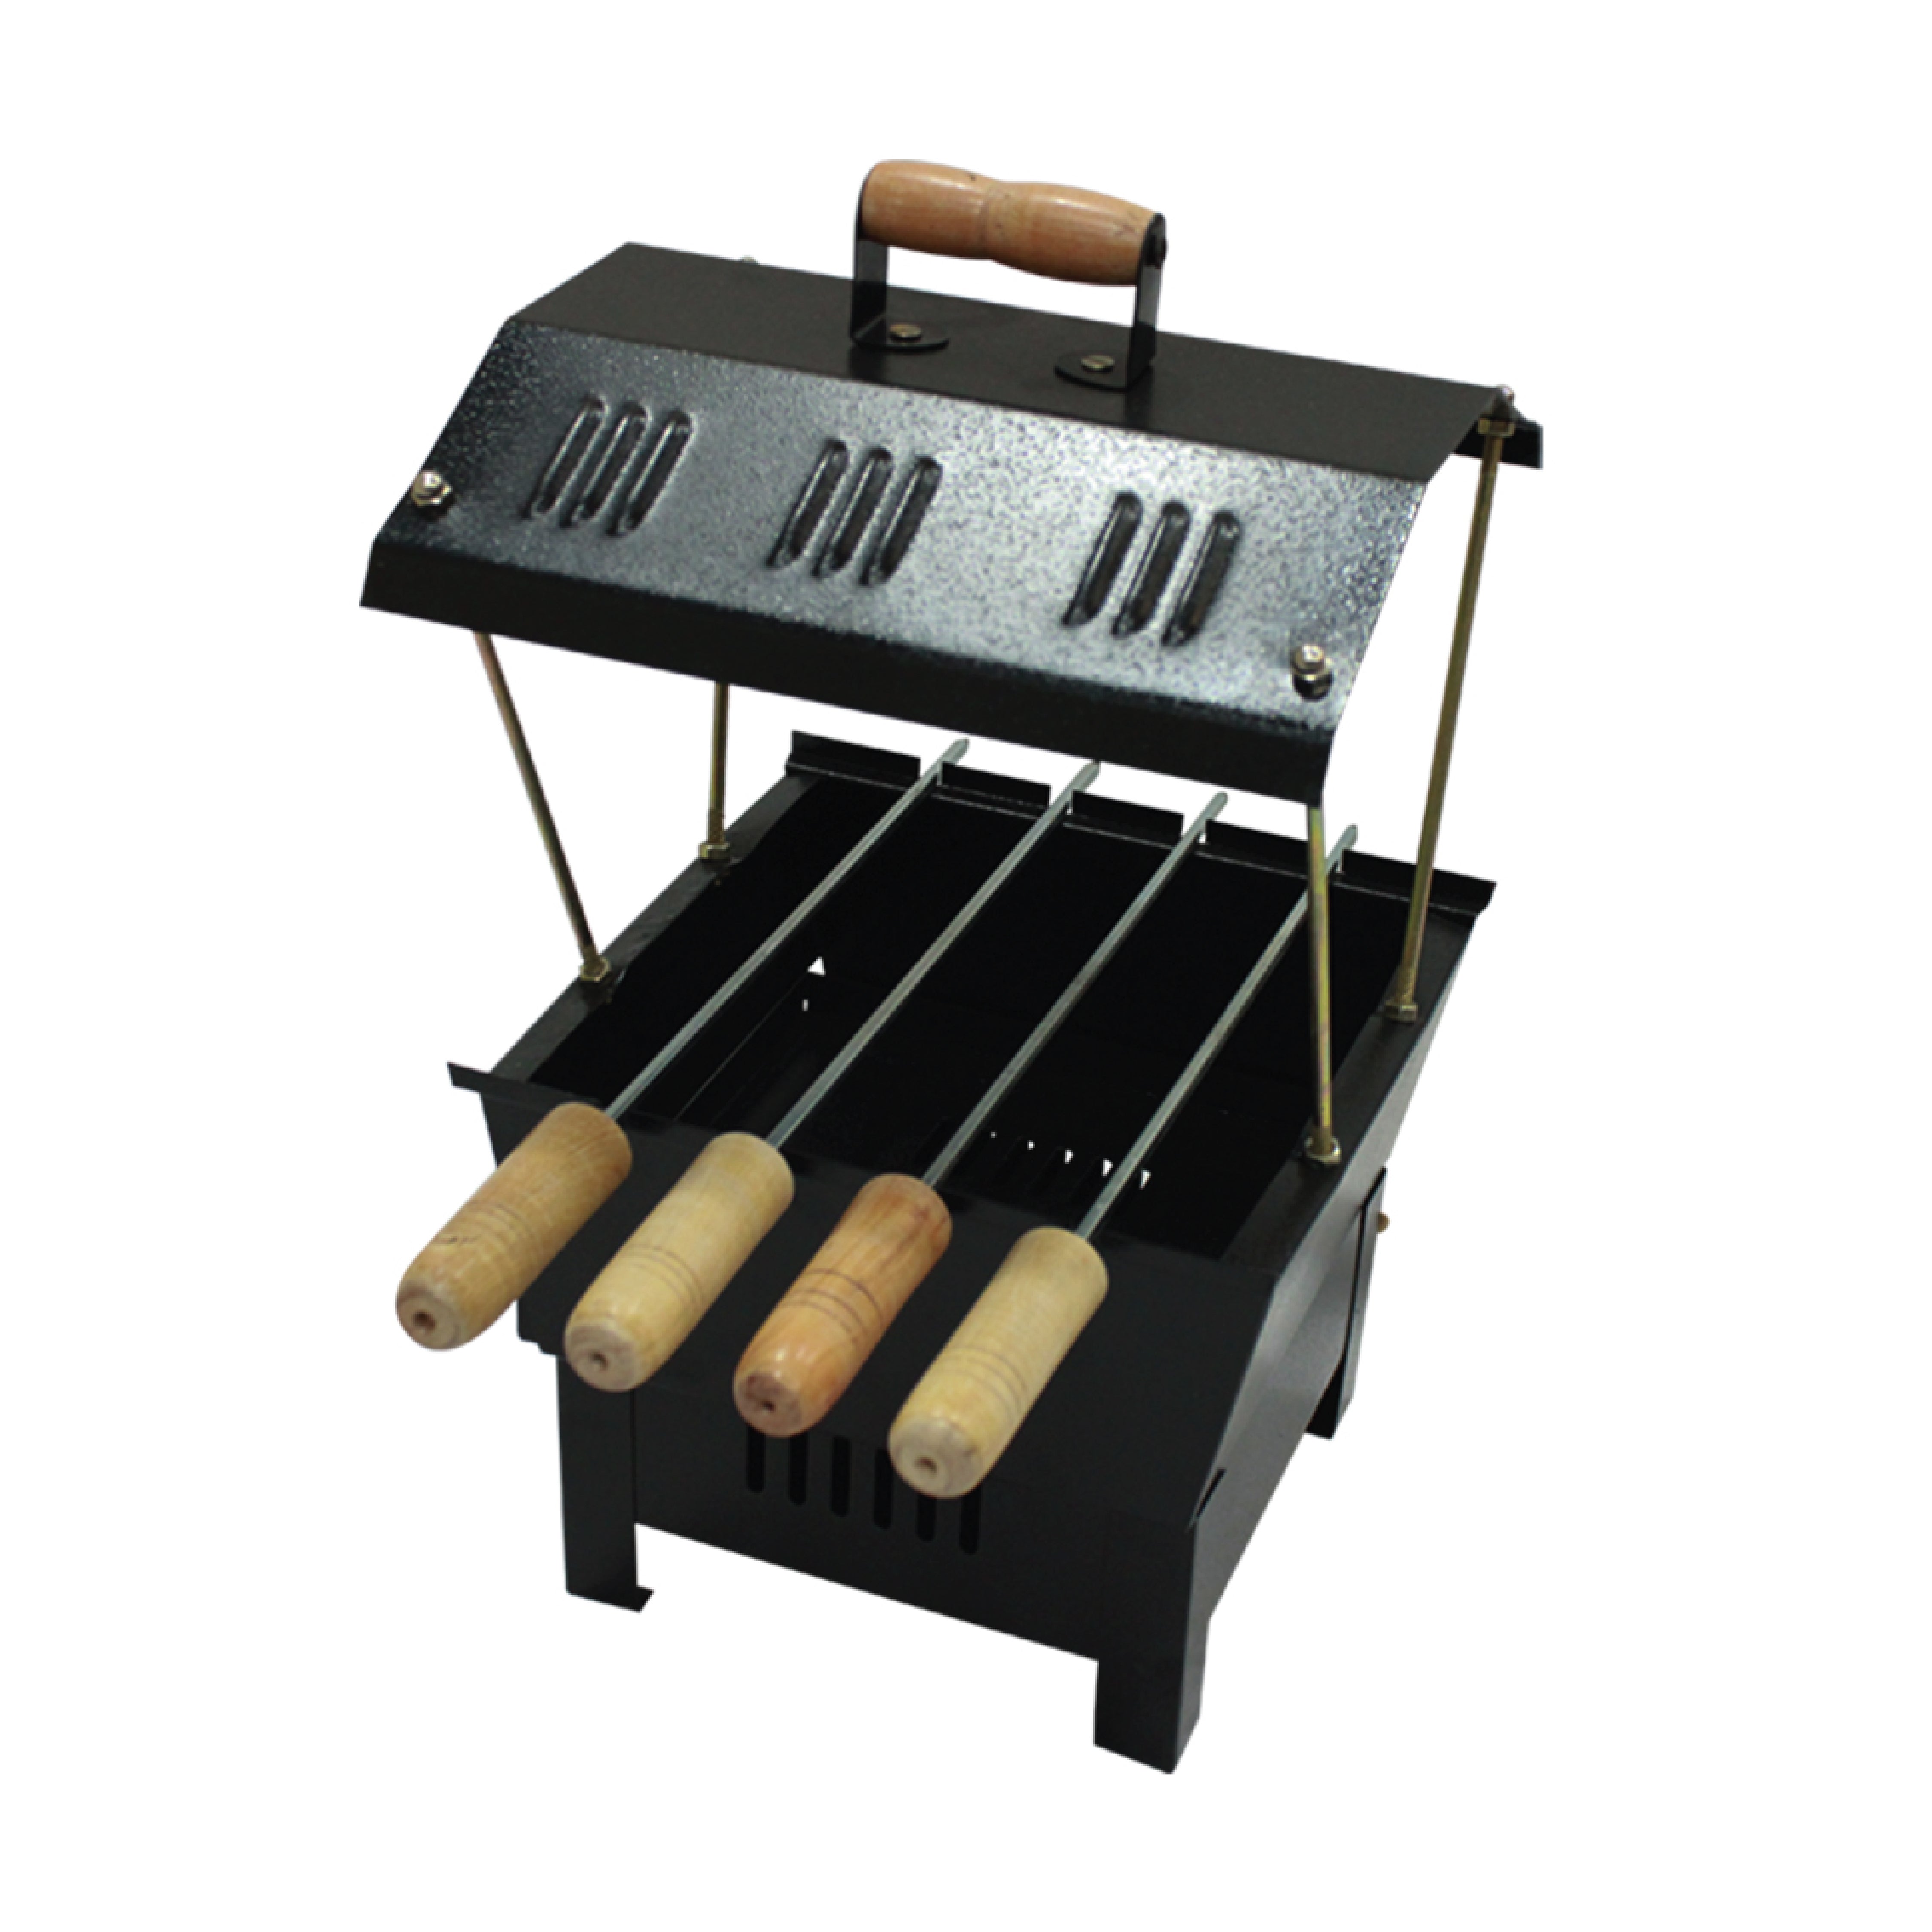 KOWS 4 skewer coal barbeque (BBQ005)